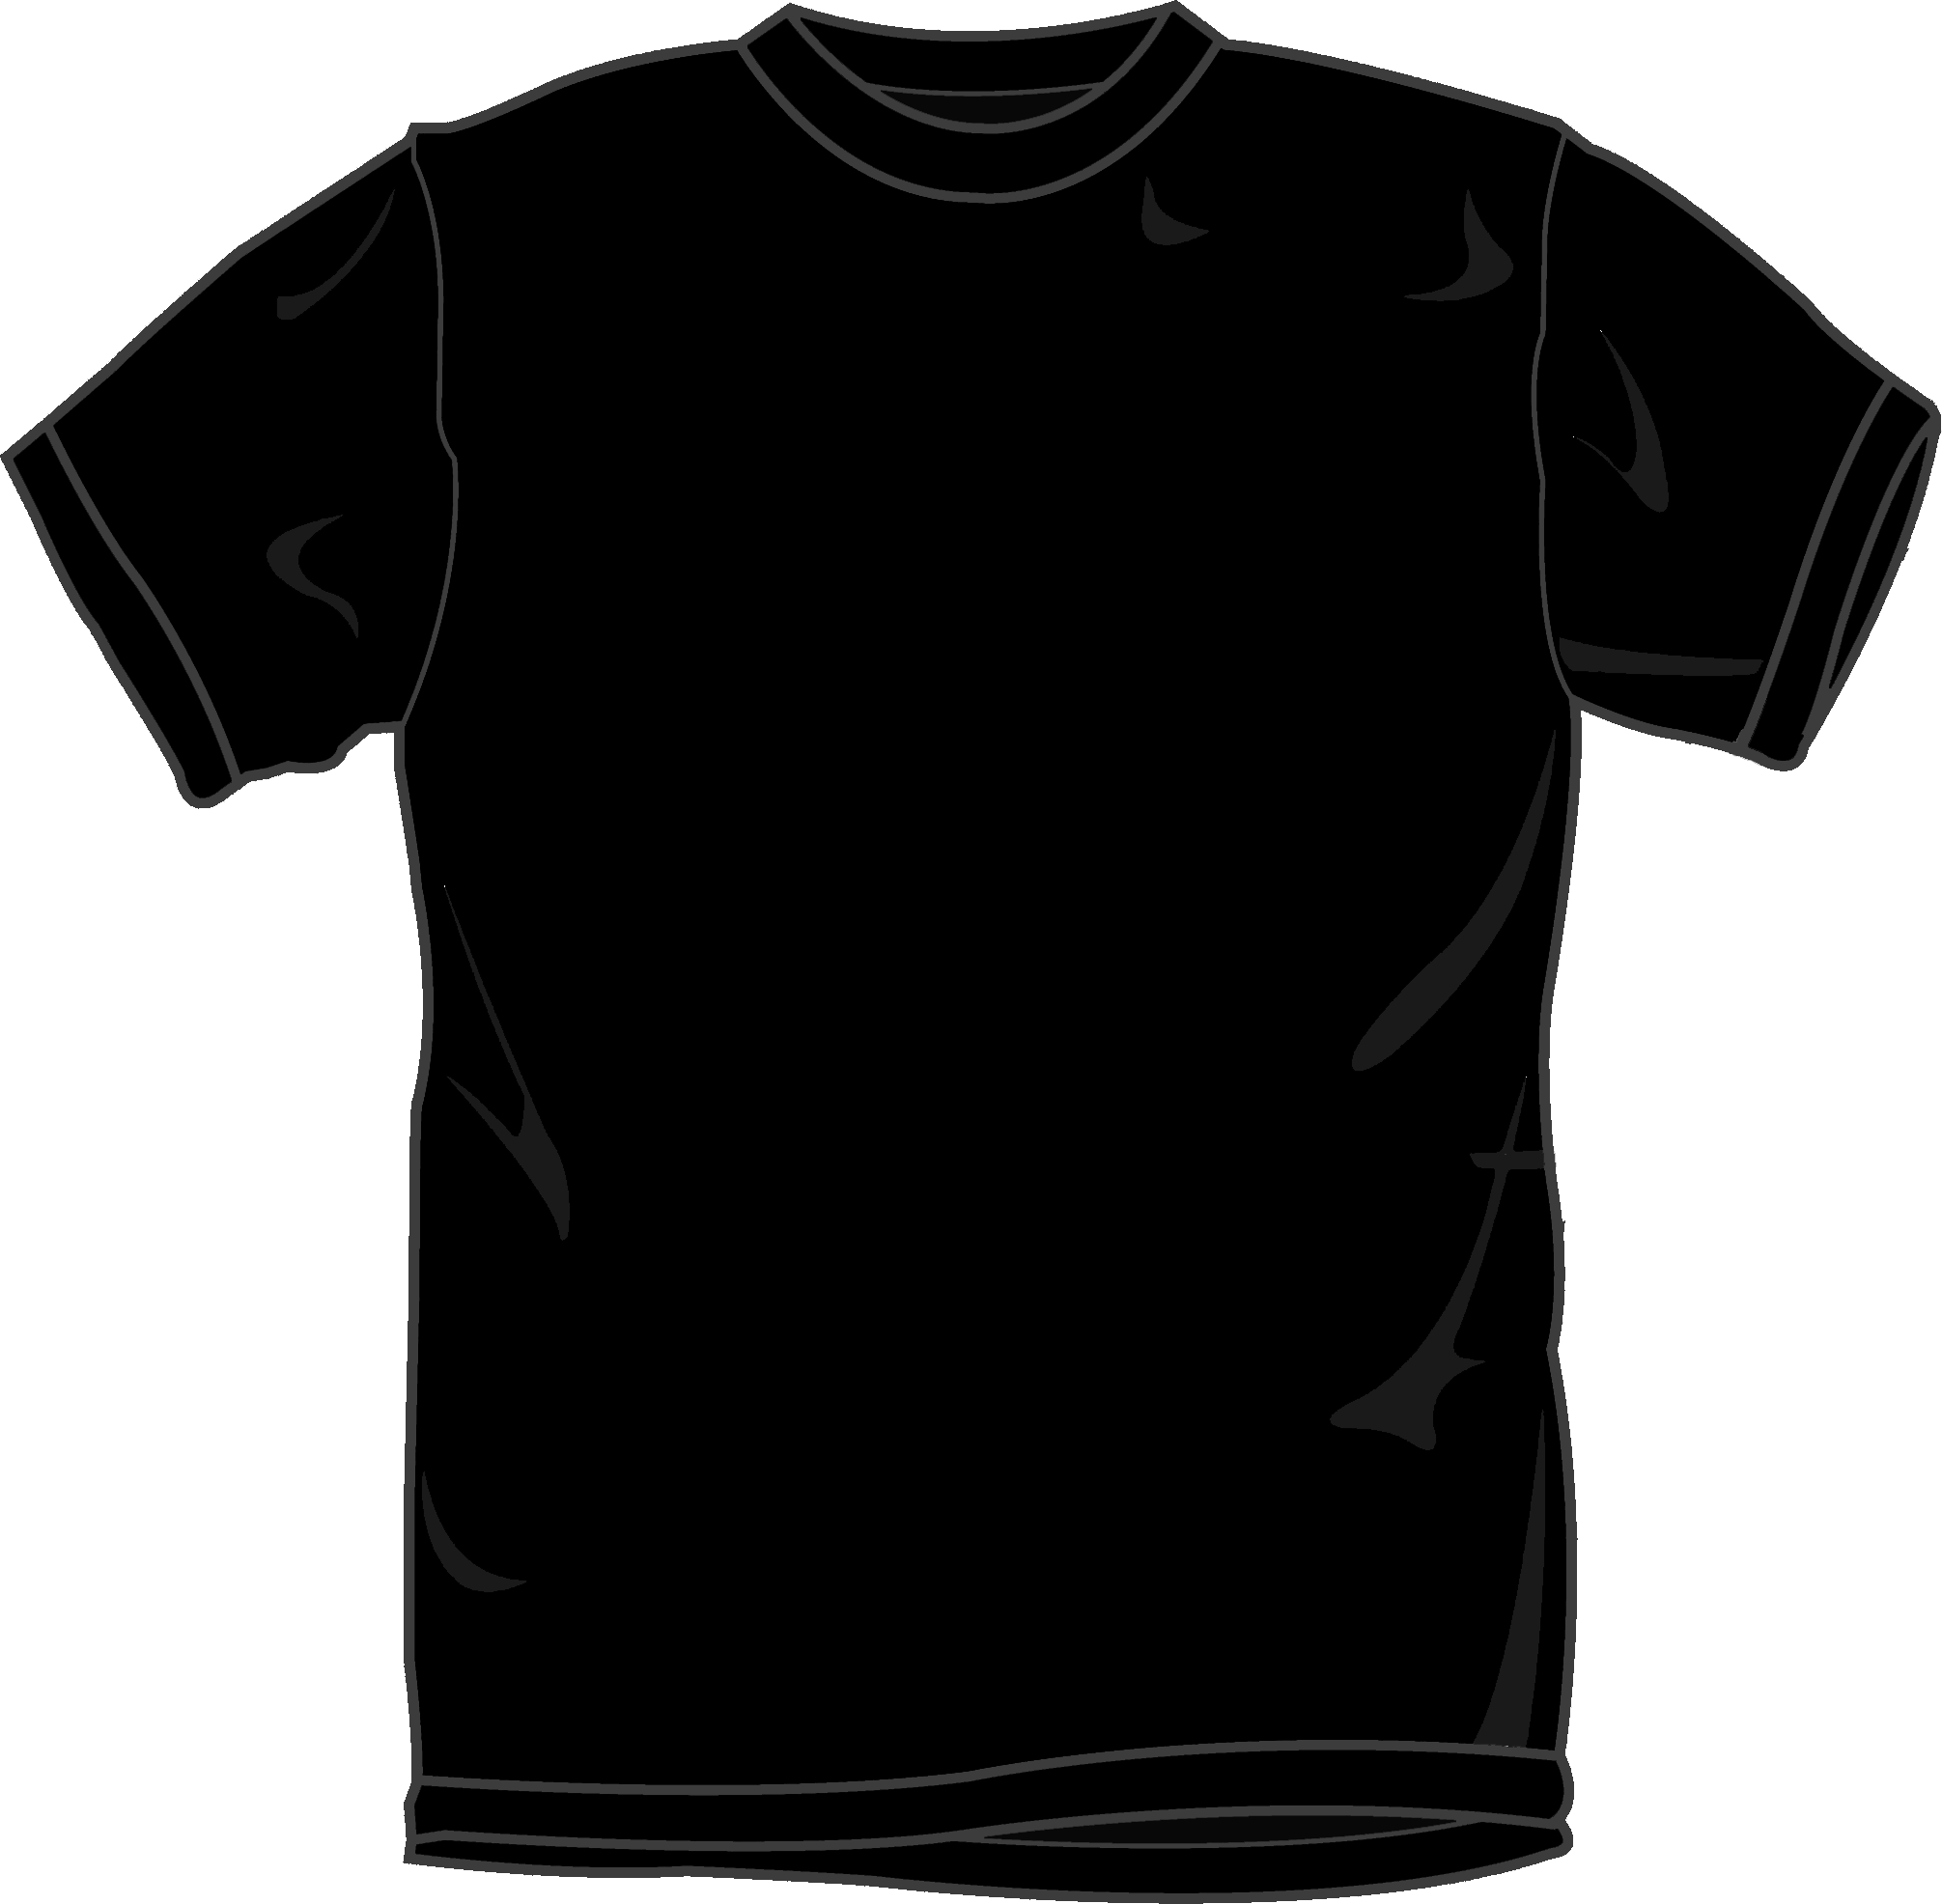 Black T Shirt Template Front Clipart Free To Use Clip Art Resource ClipArt Best ClipArt Best